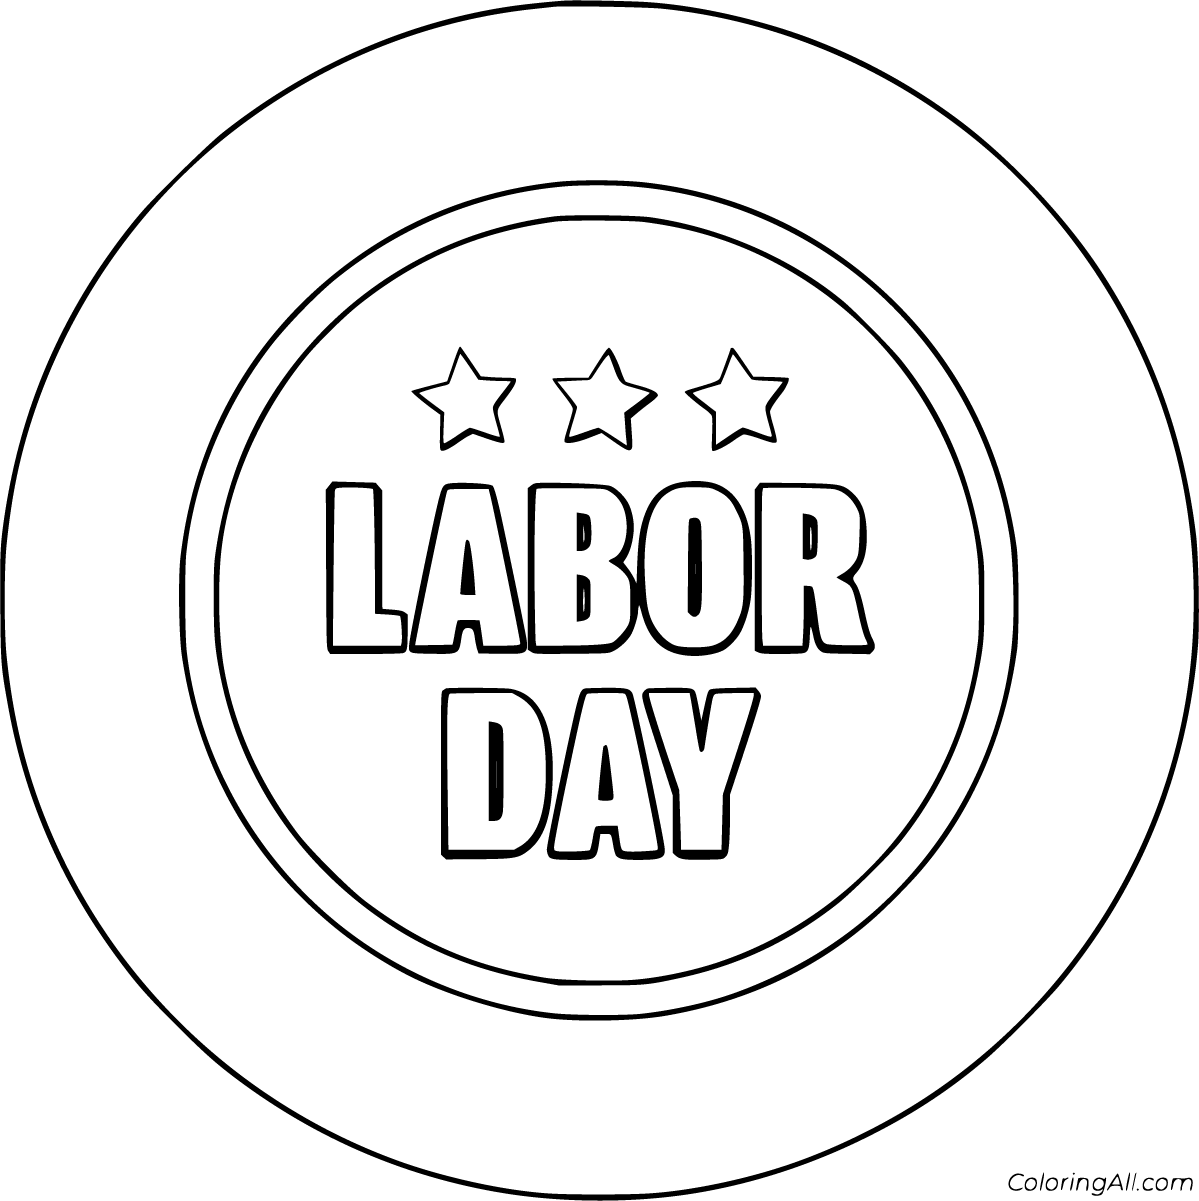 labor-day-coloring-pages-coloringall